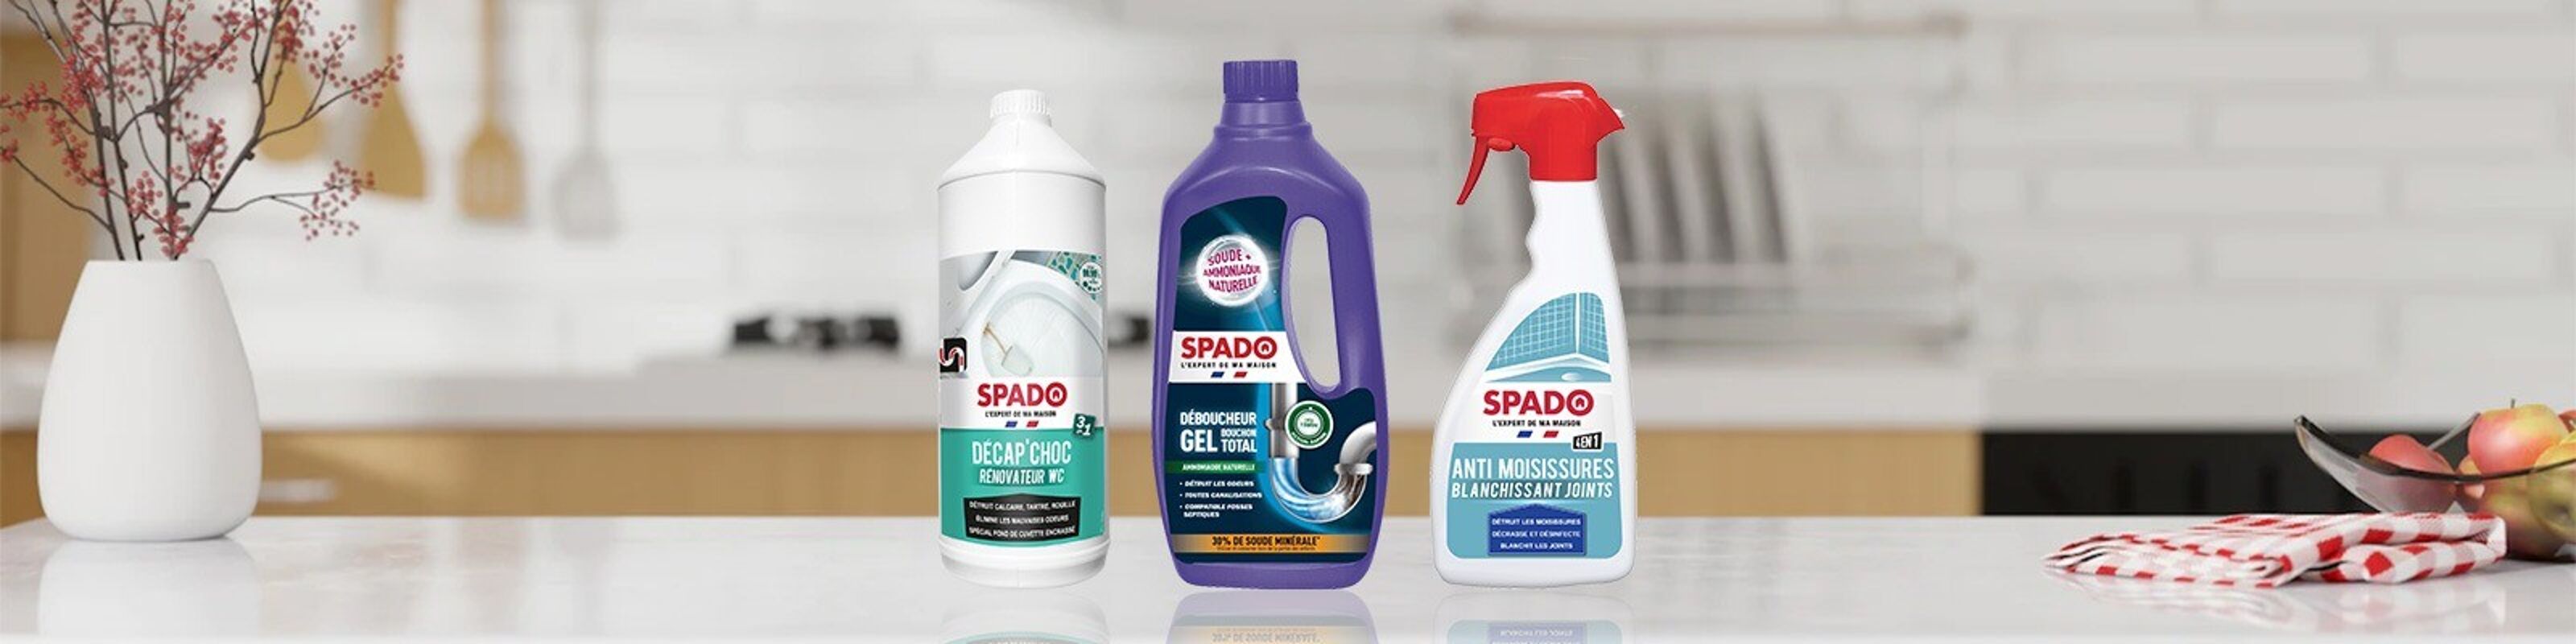 Buy Spado wholesale products on Ankorstore - 2